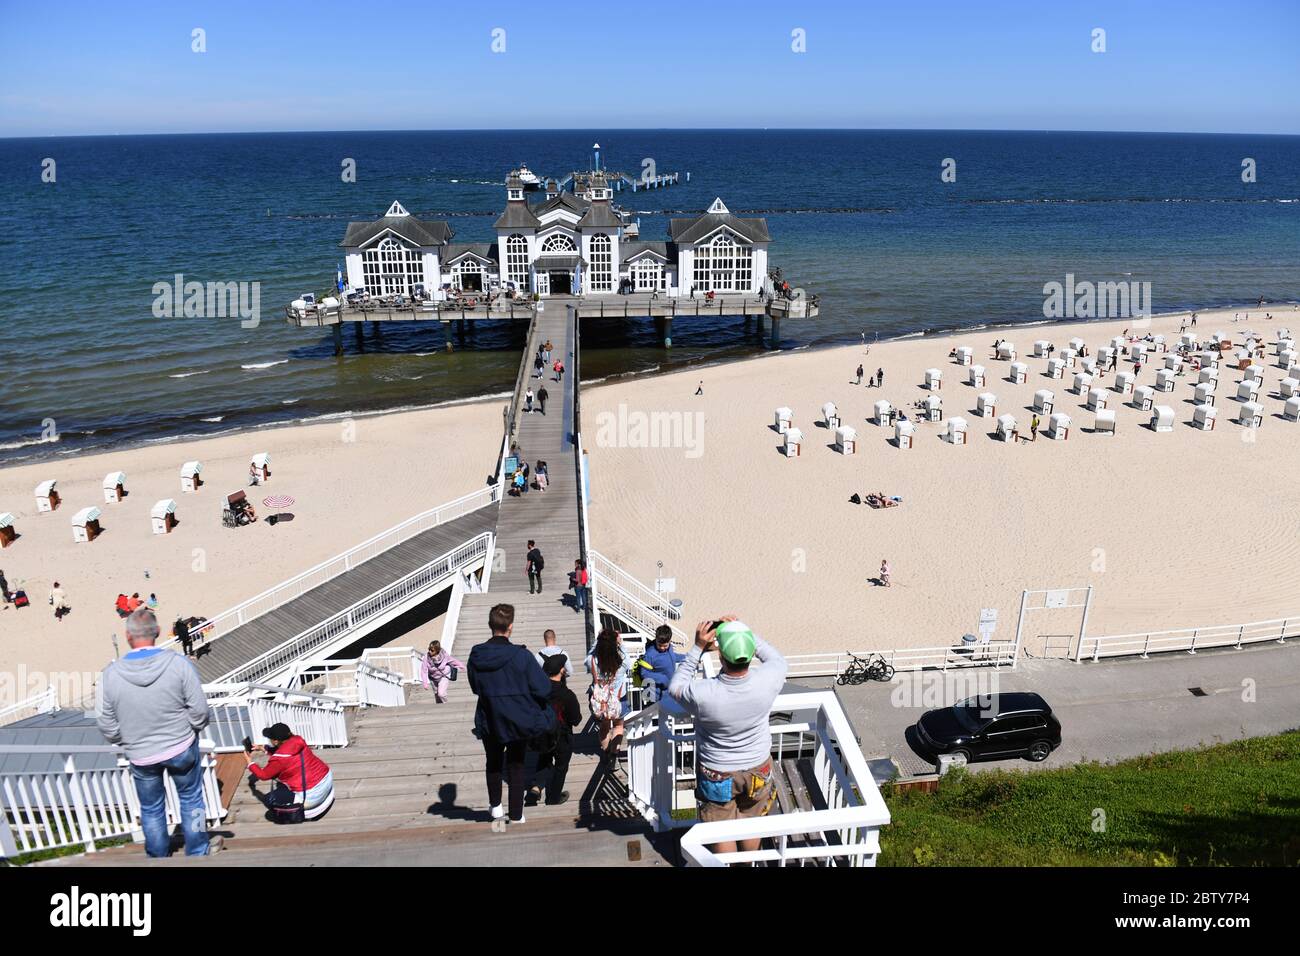 28 May 2020, Mecklenburg-Western Pomerania, Sellin: Tourists cross the pier in the Baltic resort Sellin. Day tourists, however, are not allowed to travel further into the federal state. Photo: Stefan Sauer/dpa-Zentralbild/ZB Stock Photo